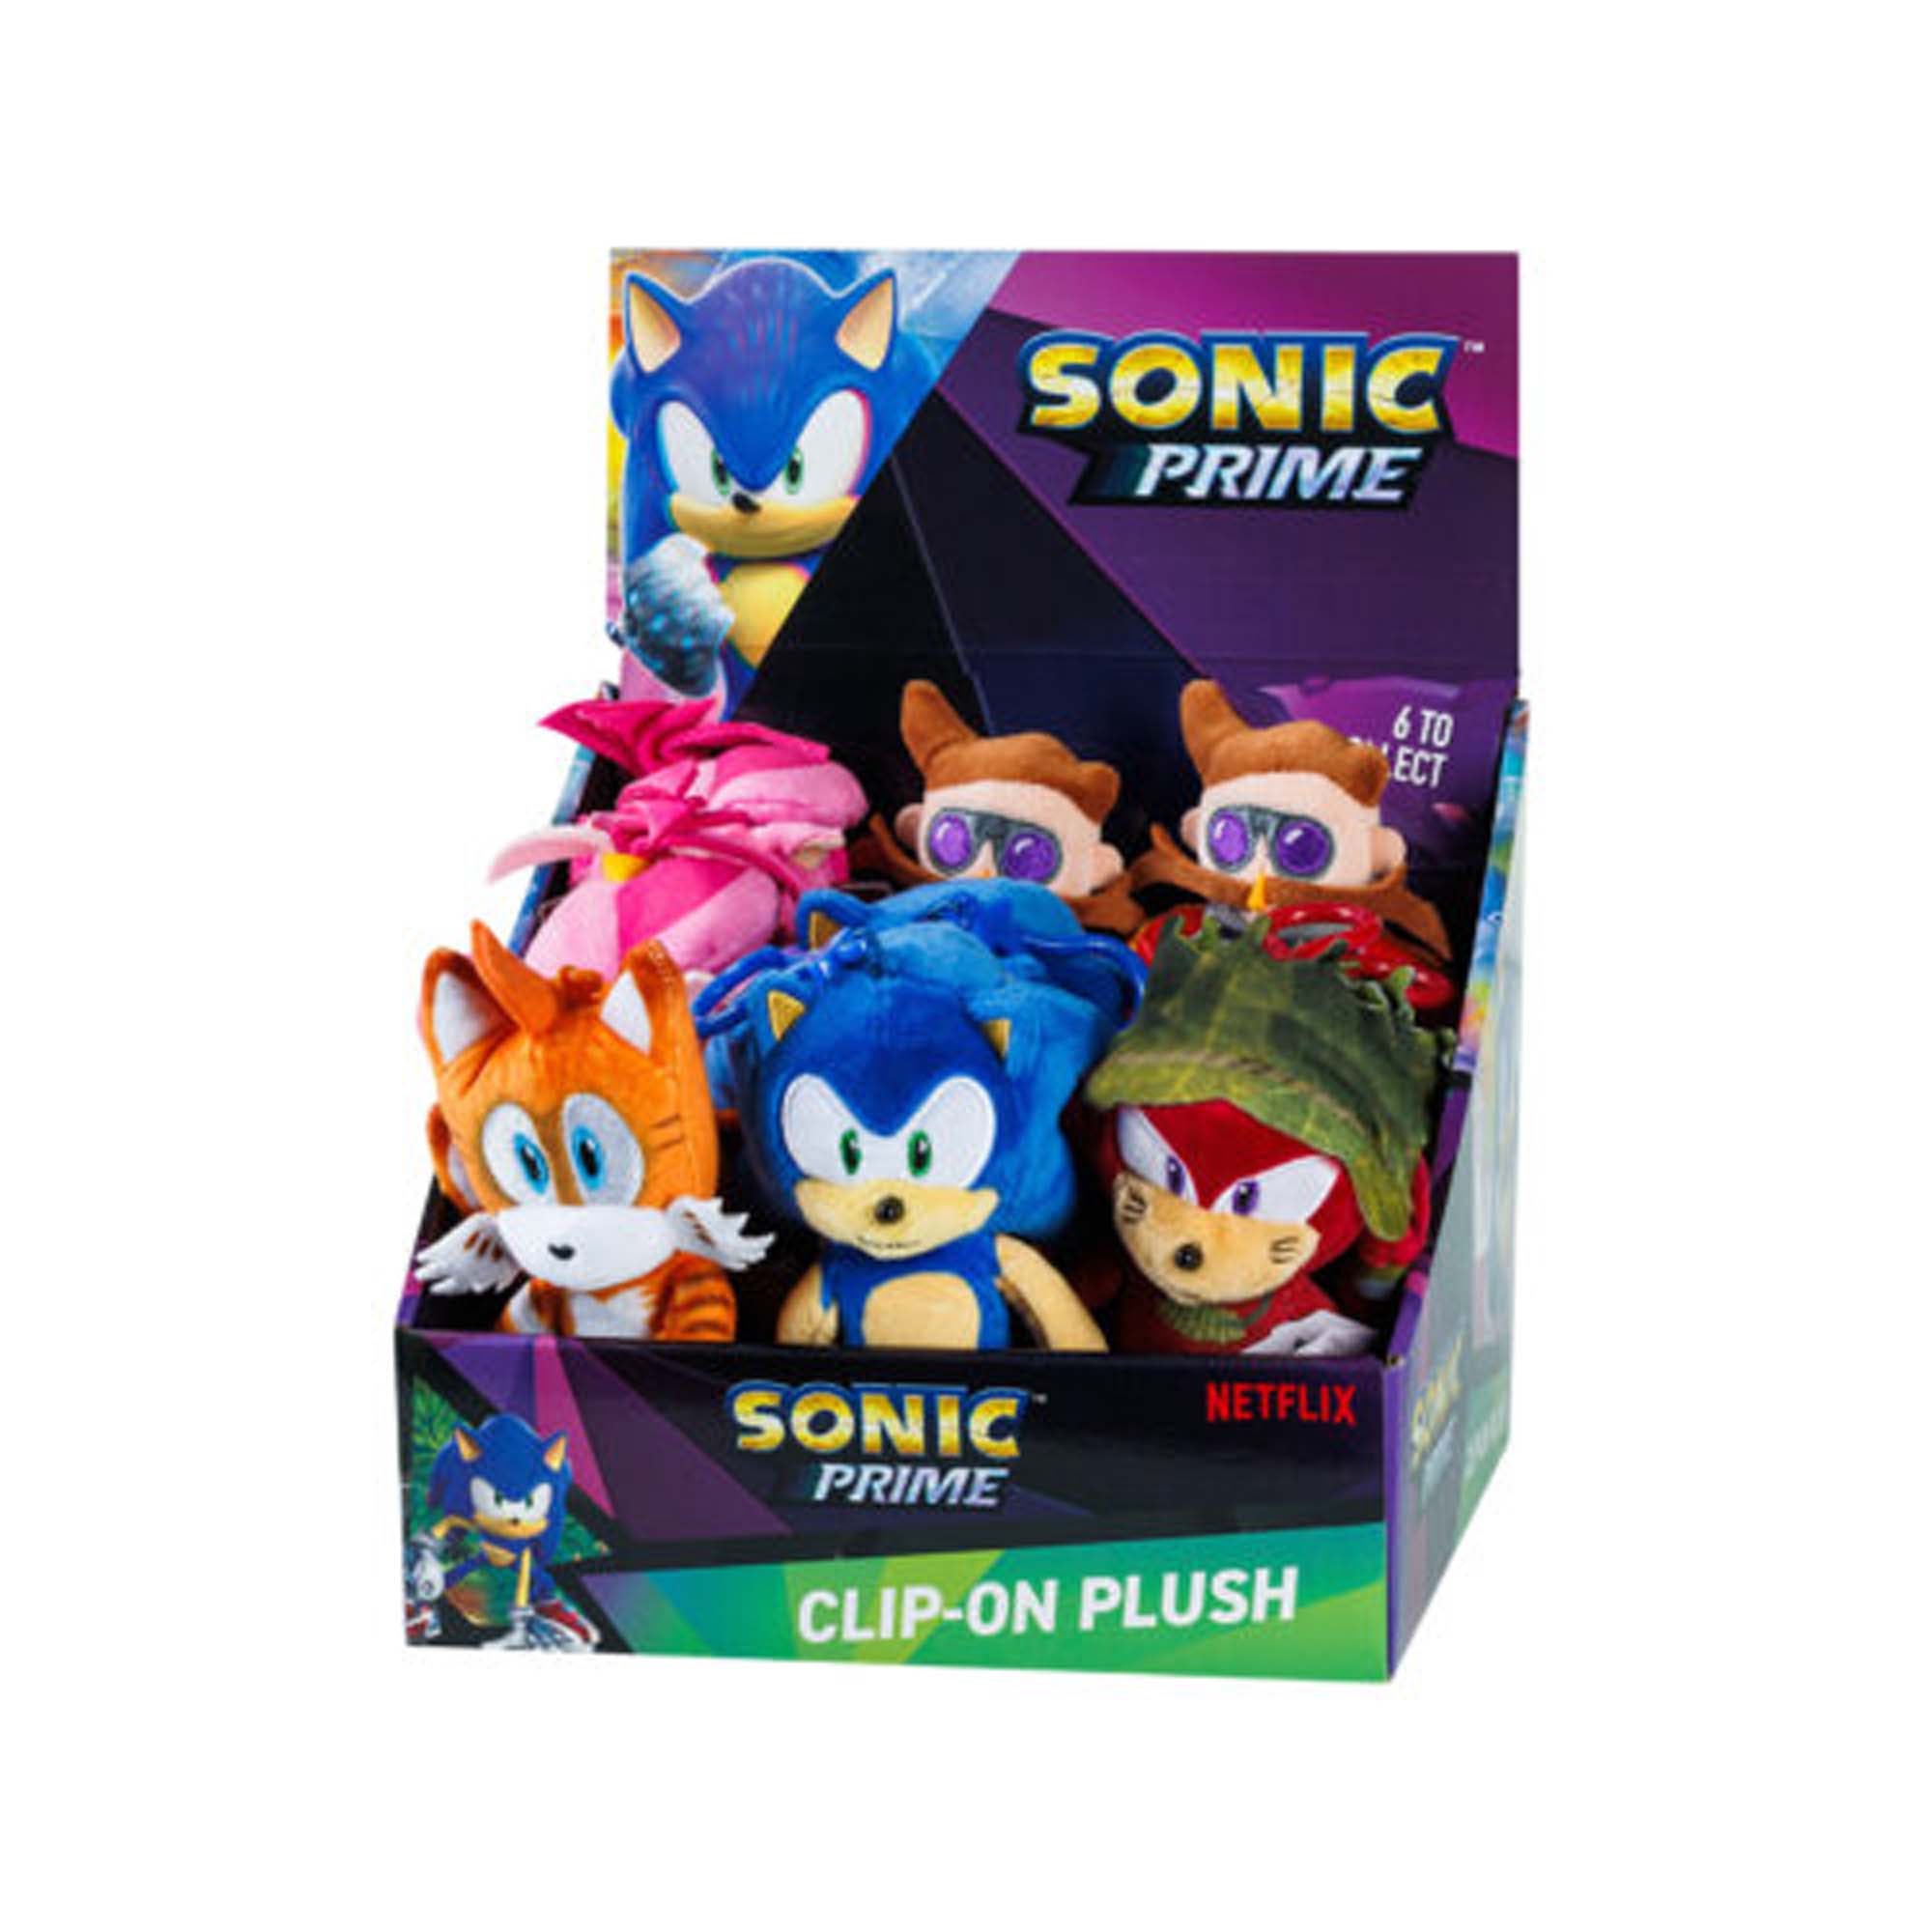 Sonic the Hedgehog Backpack Plush, 6 Inches, Assortment, 1 Count